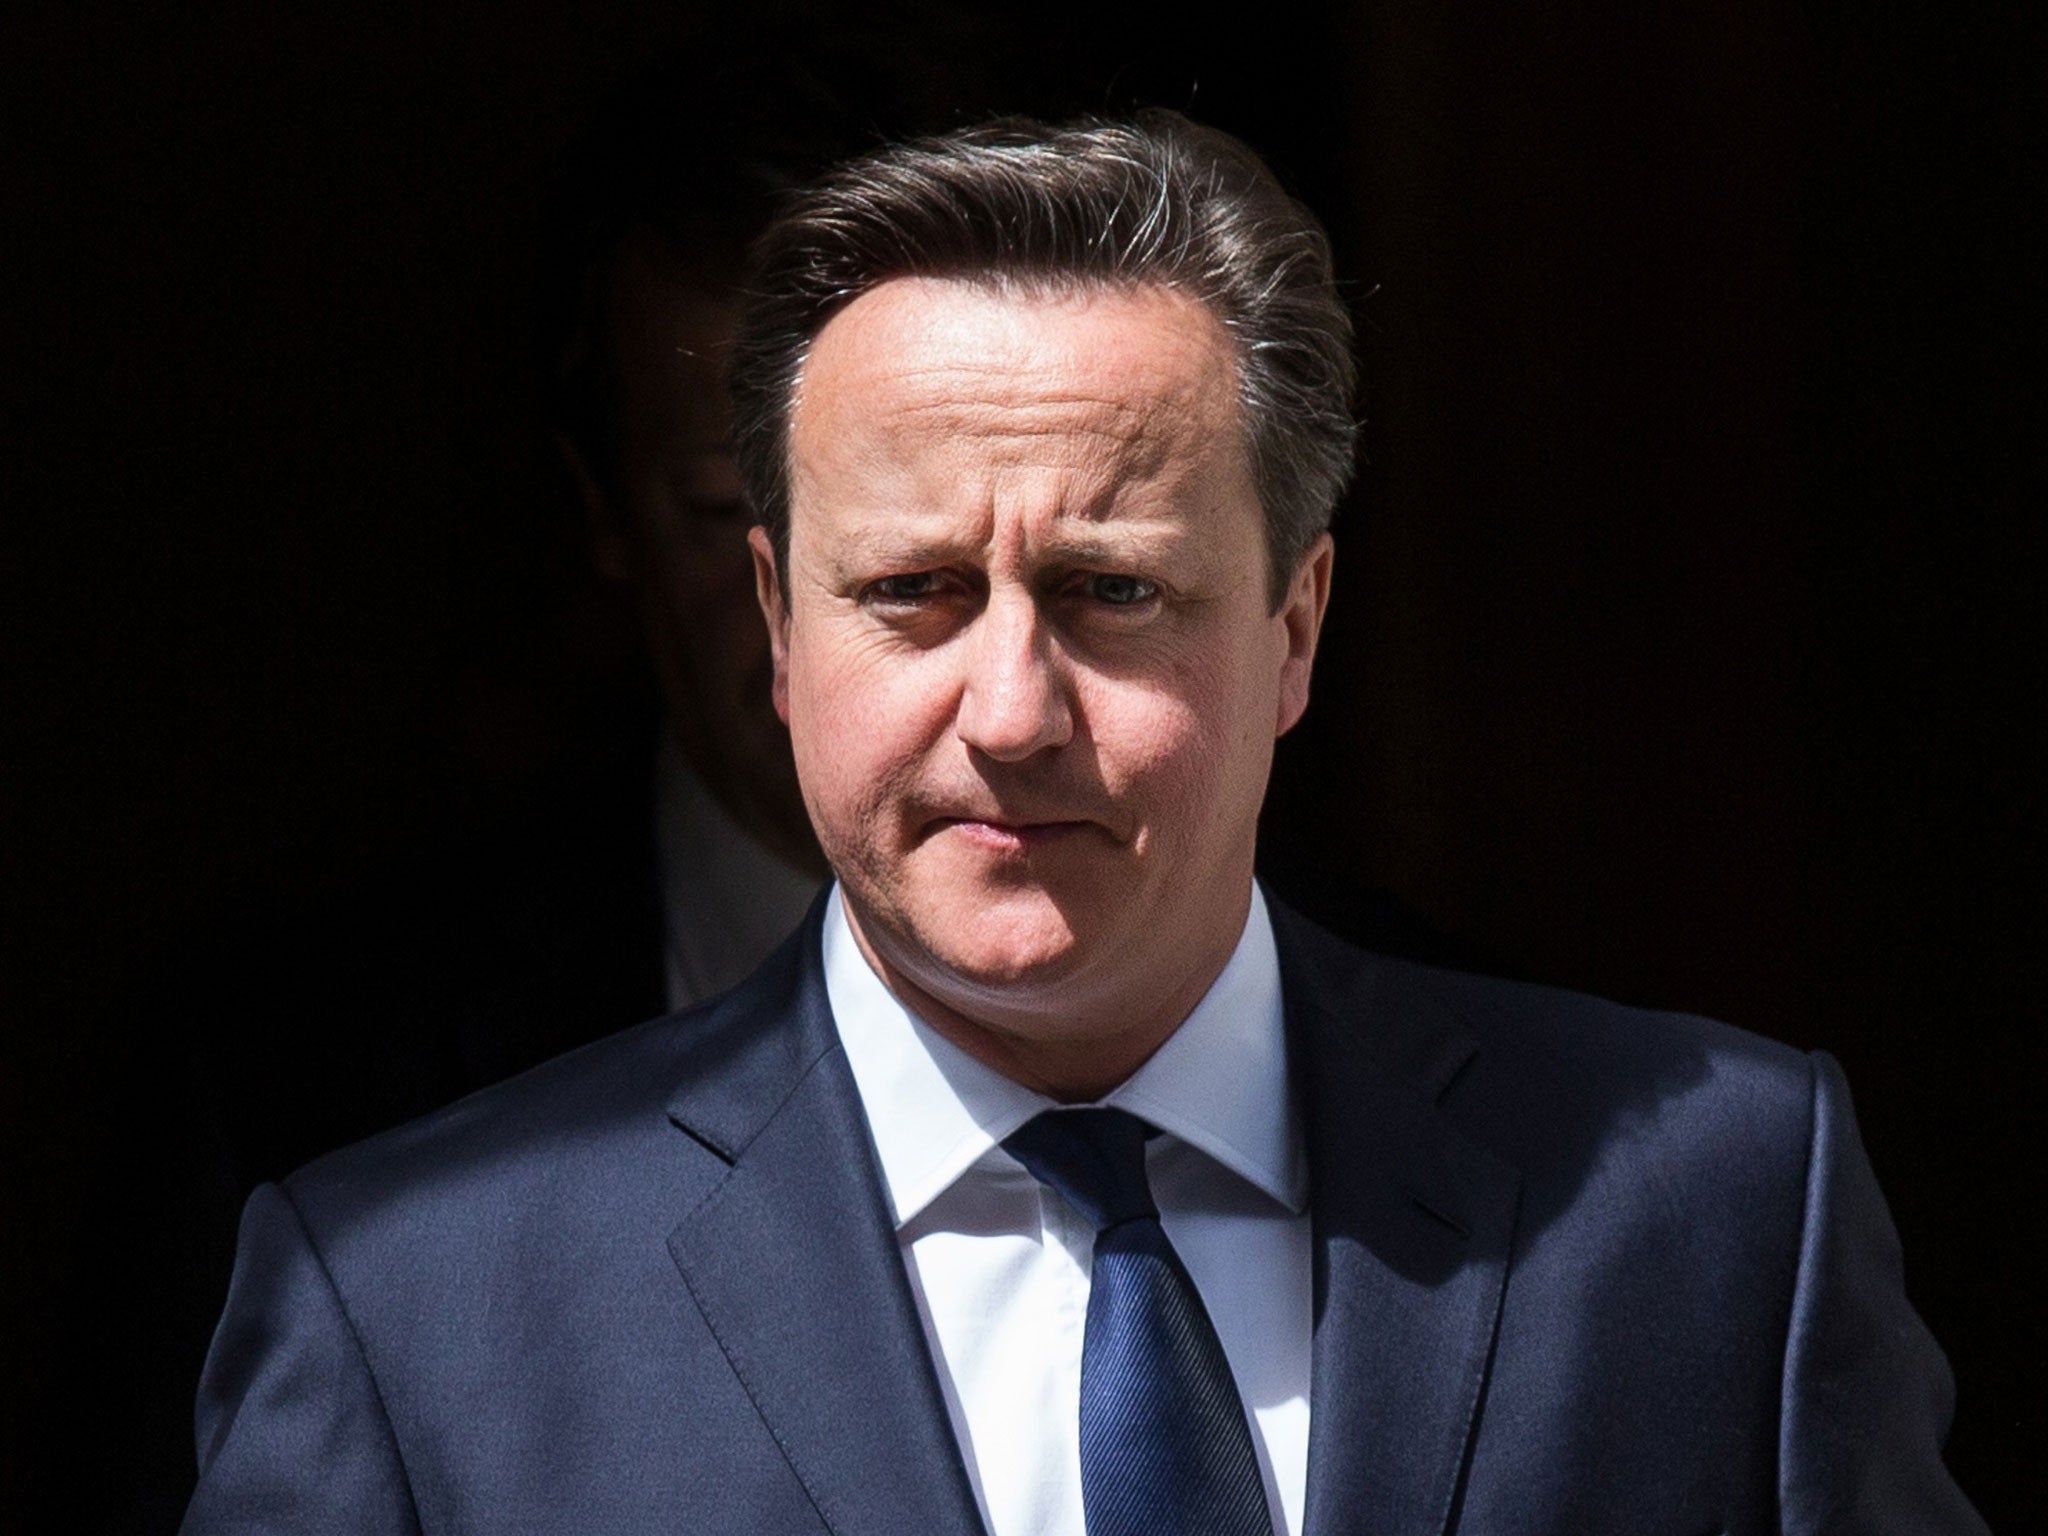 David Cameron is coming under growing pressure to change the UK's stance